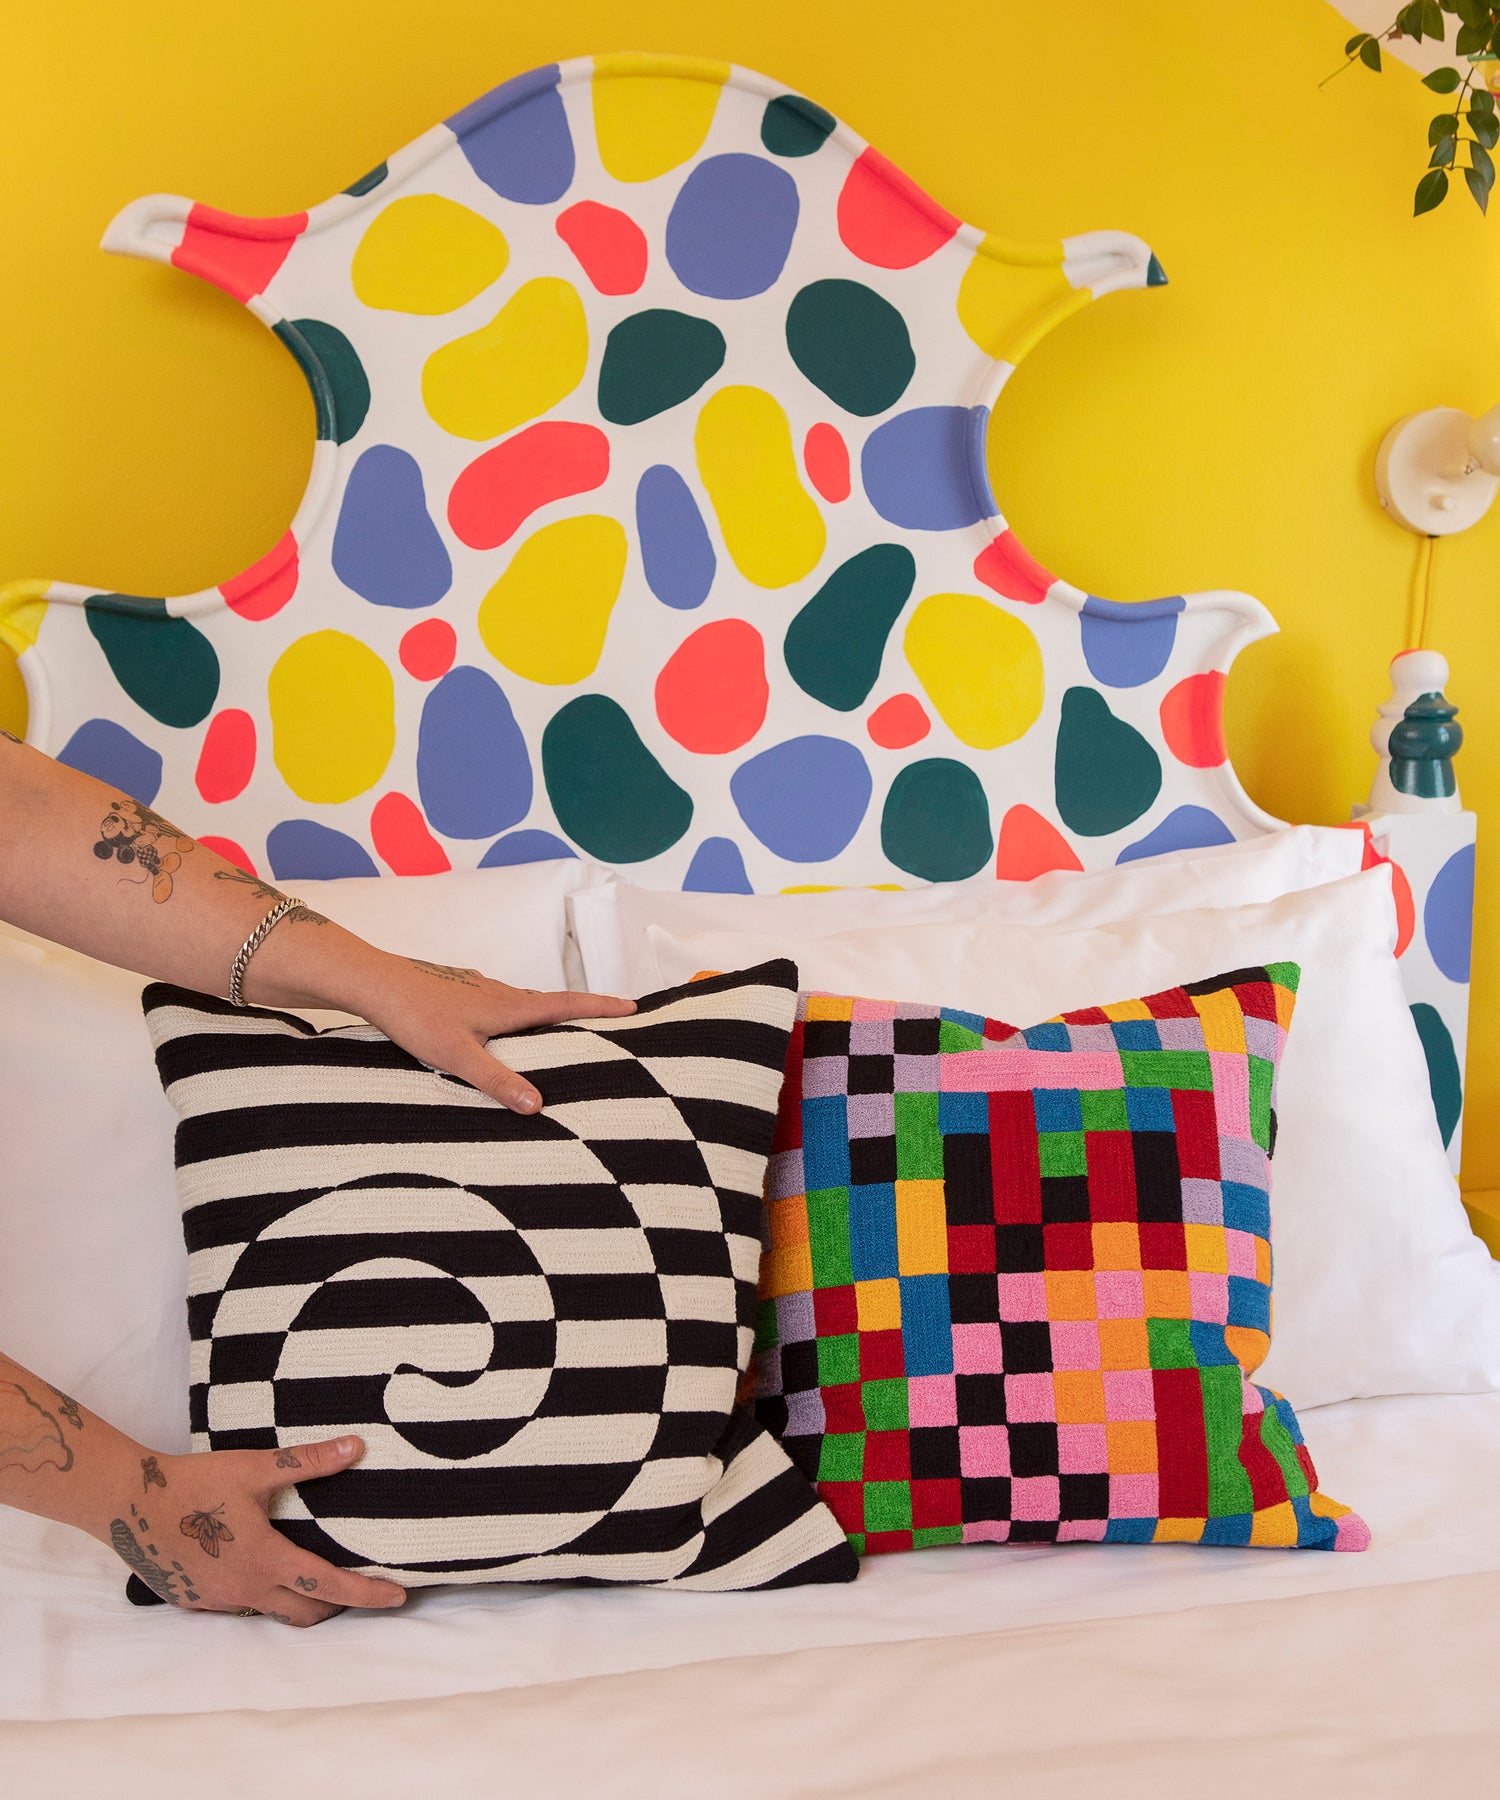 Detail of hands placing the Dazzle Pillow on a made bed next to the Pixels Pillow Cover.